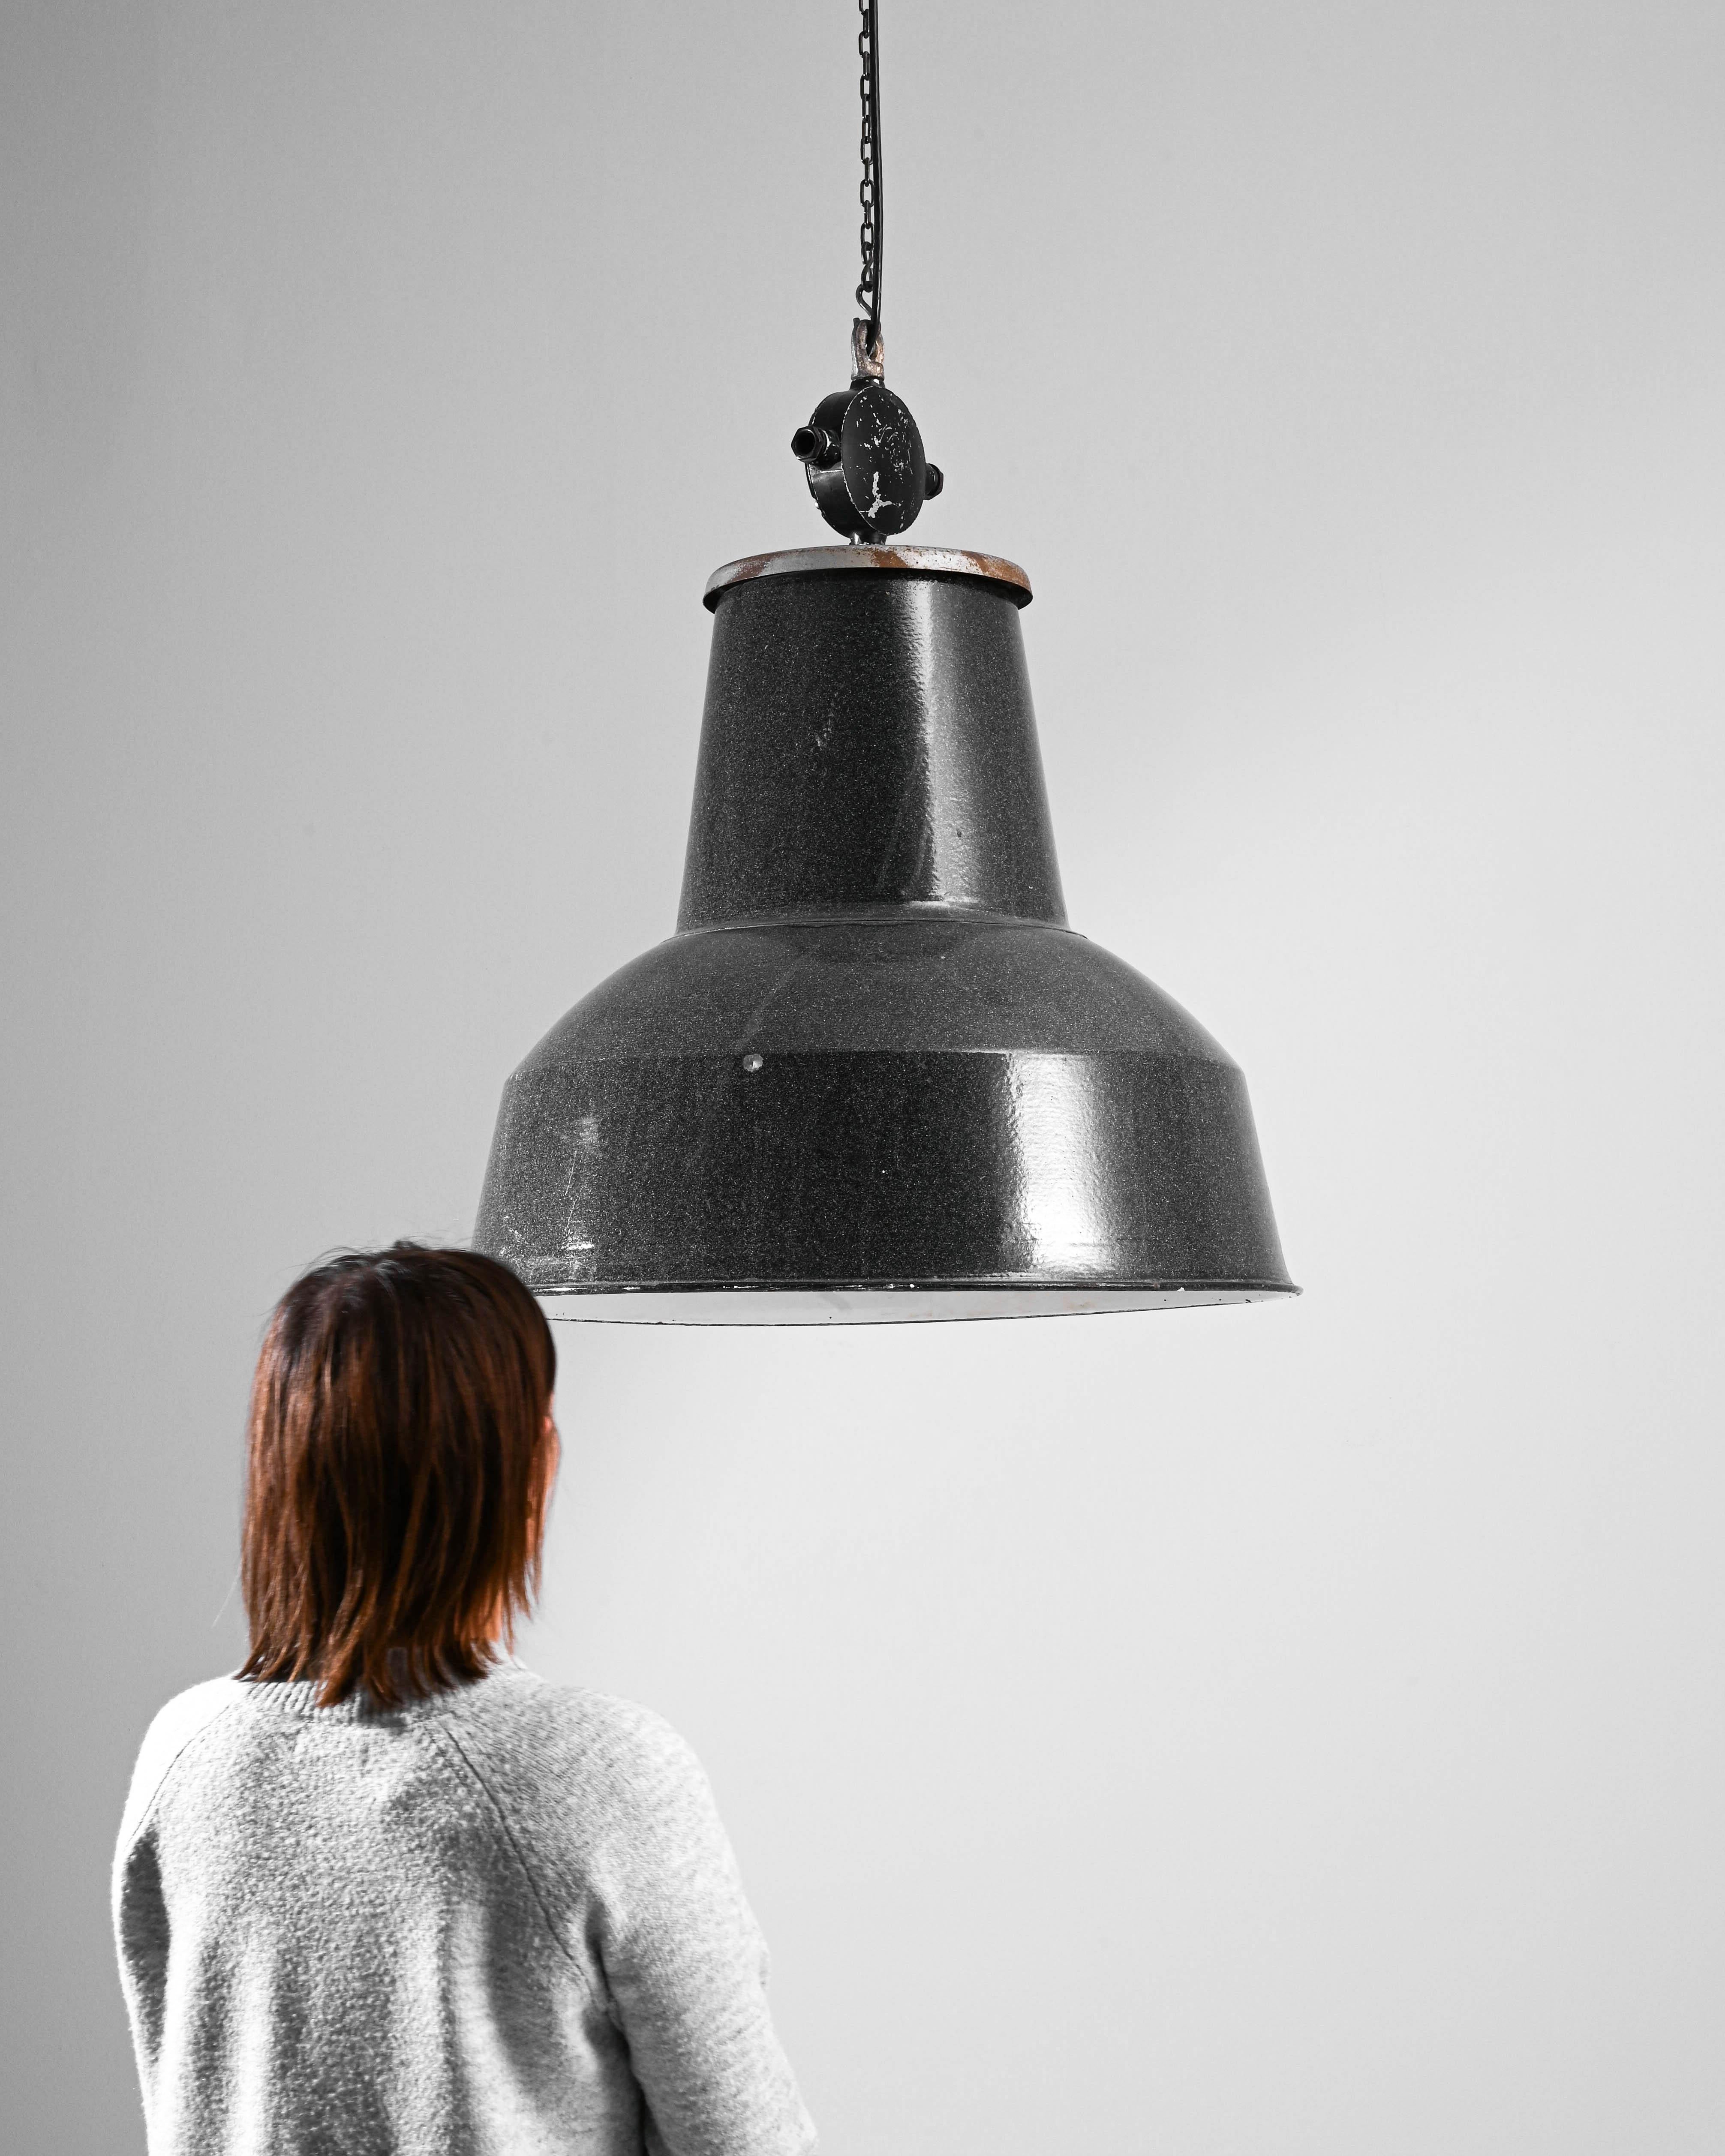 Illuminate your space with a touch of industrial history – the 20th Century Czech Industrial Pendant Lamp. This robust lighting fixture embodies the raw aesthetic of its era, featuring a substantial metal shade whose time-weathered patina tells a